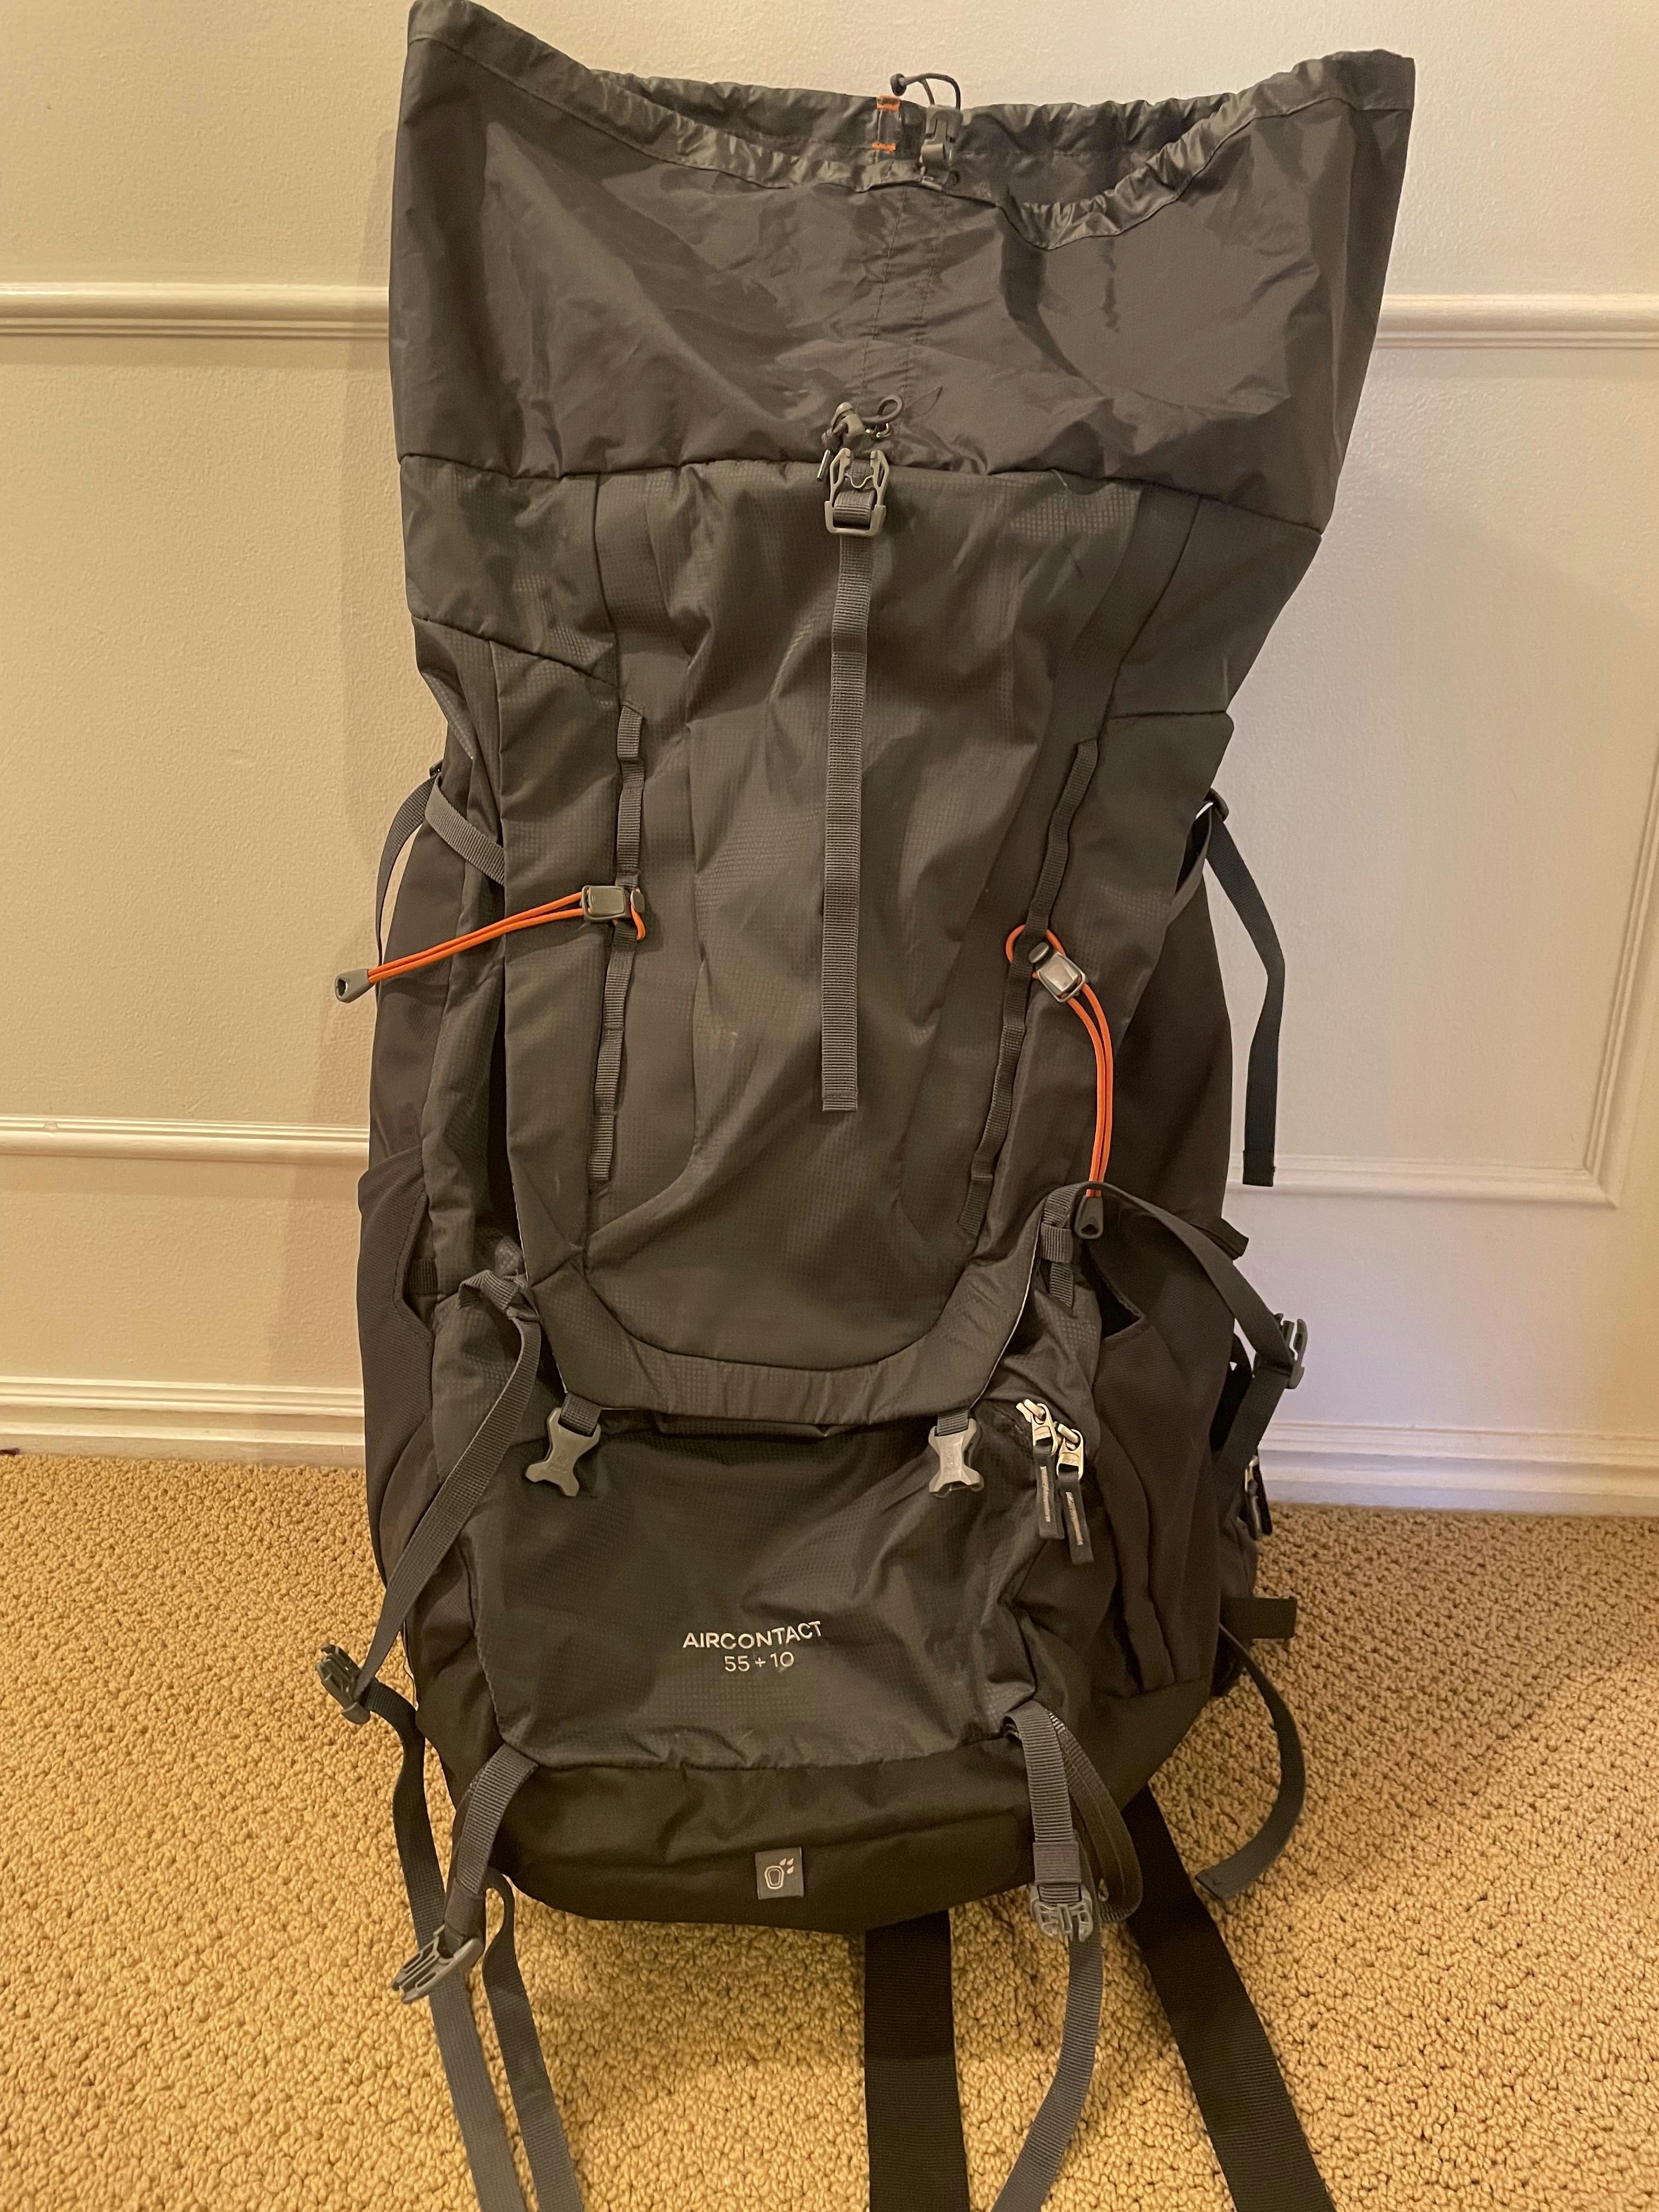 Outside of the Deuter - Aircontact 55+10 Pack.